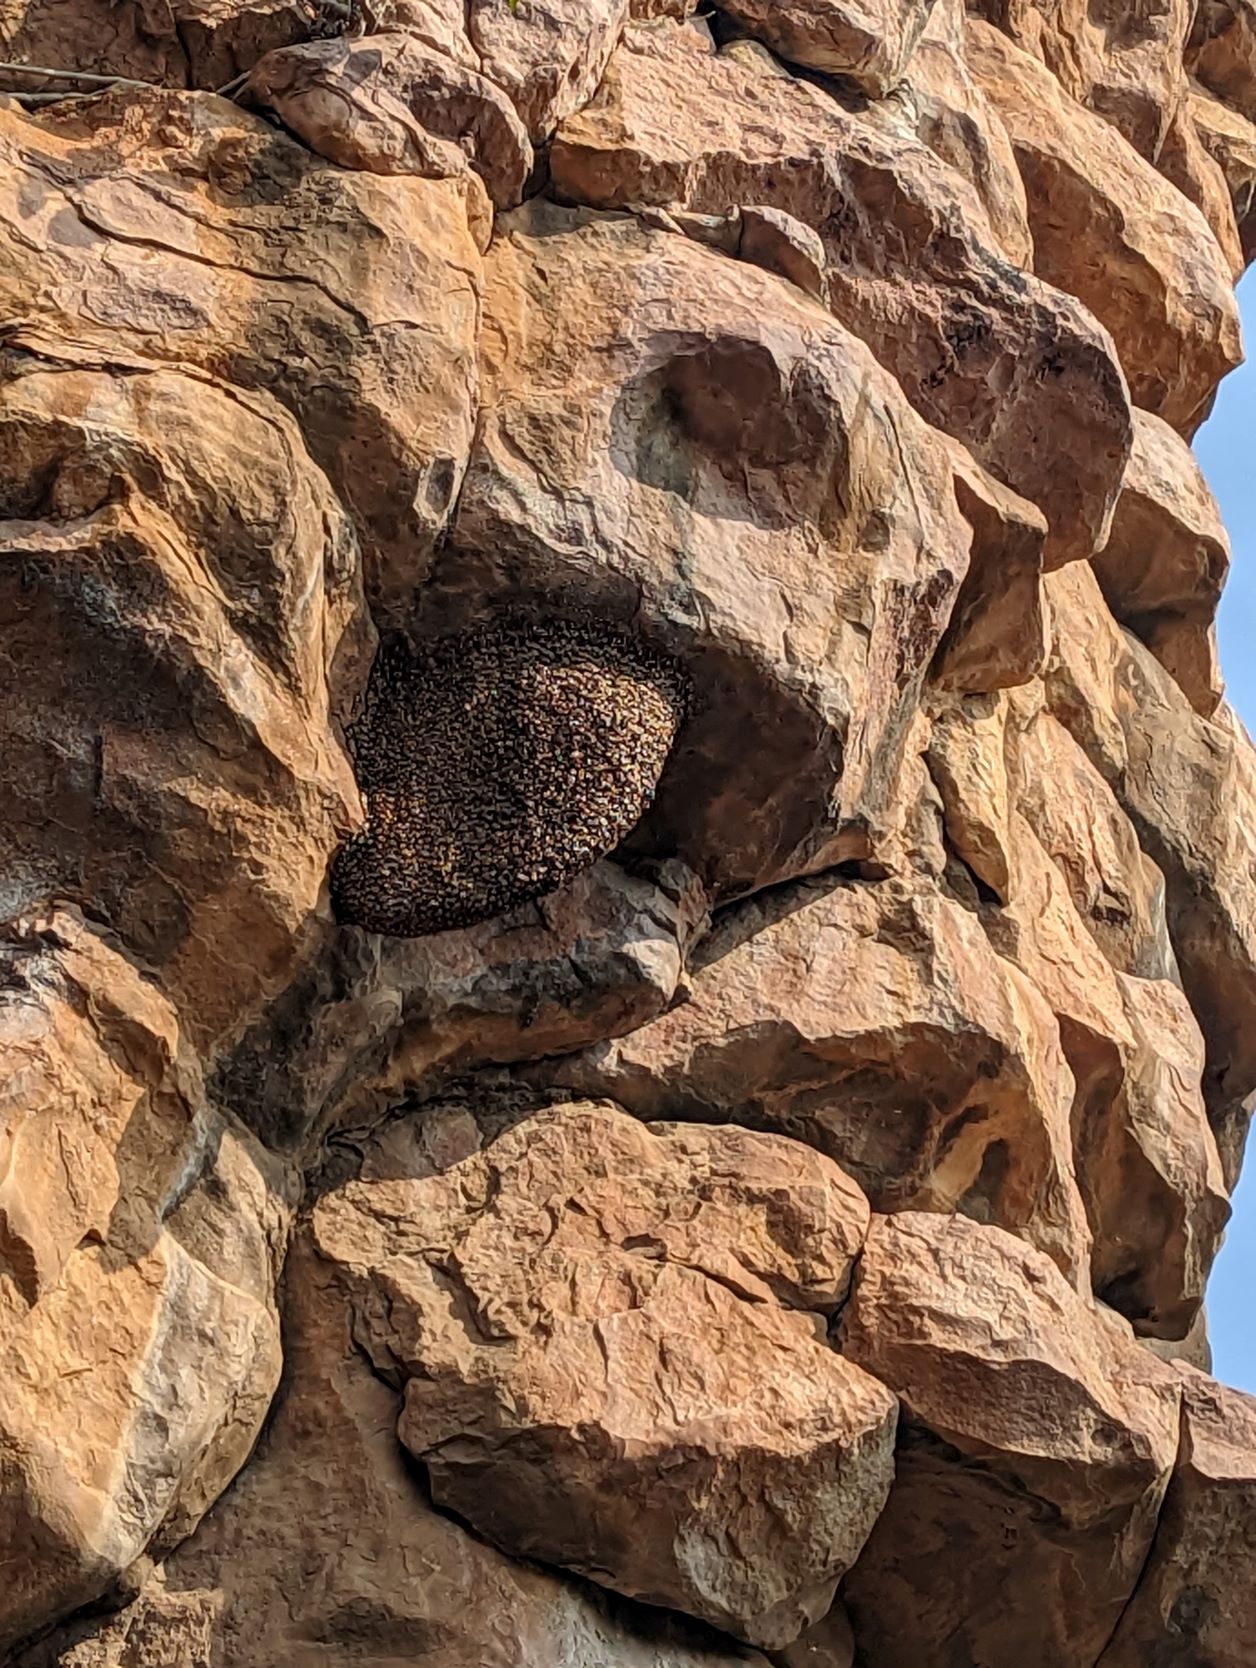 Large beehives clinging to the underside of rocky cliffs